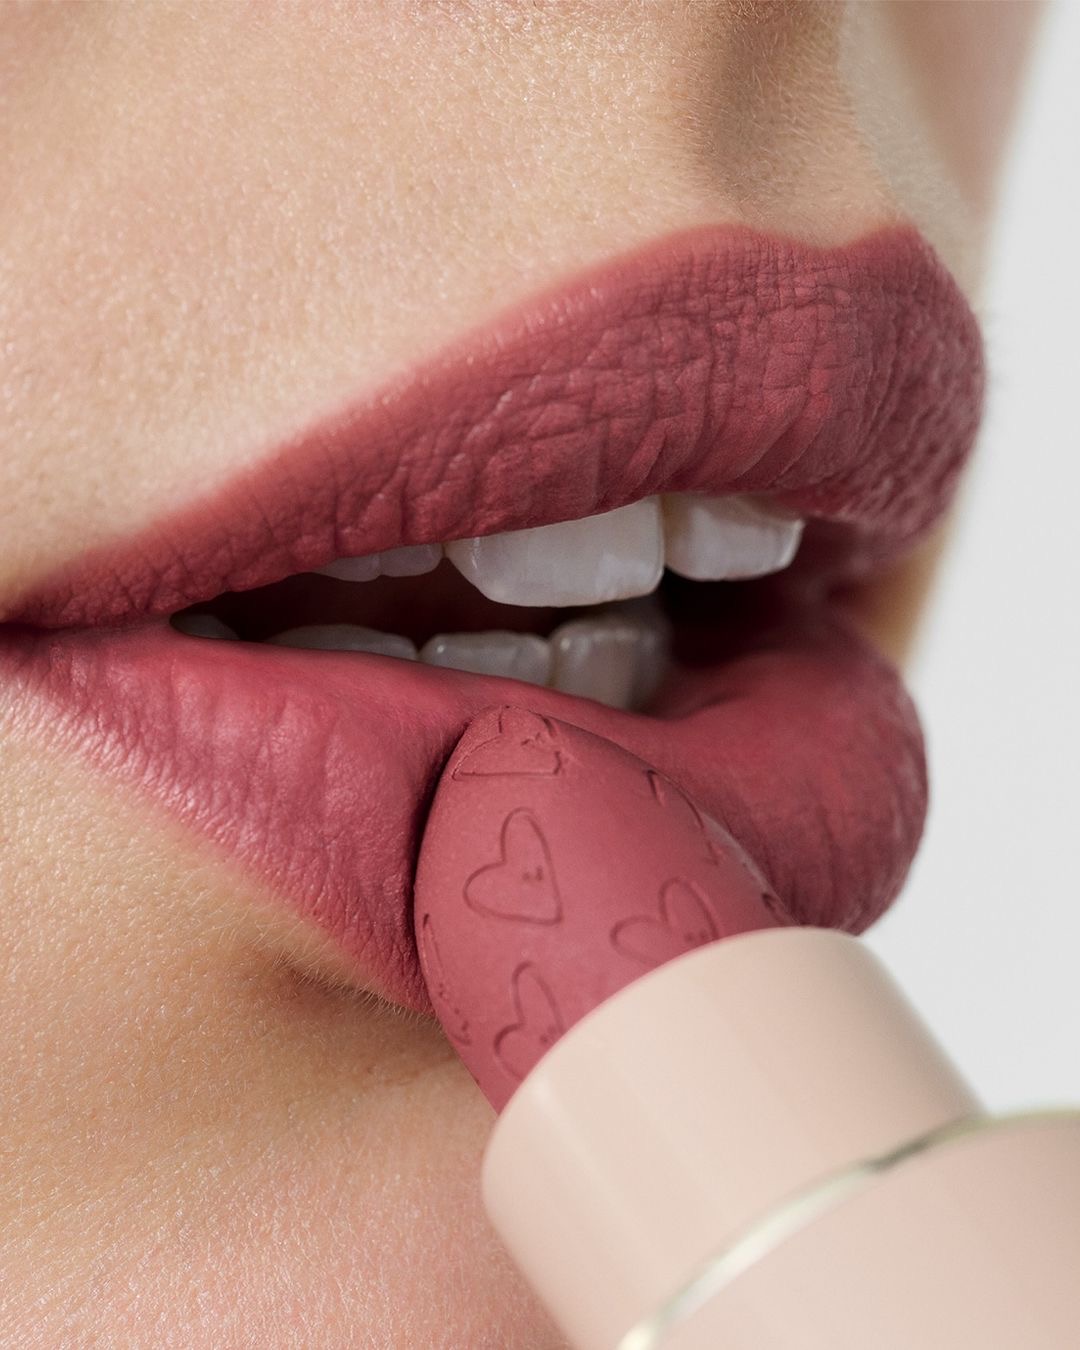 Westman Ateliers Matte Lip Is The New Lipstick Your Lips Need ASAP 